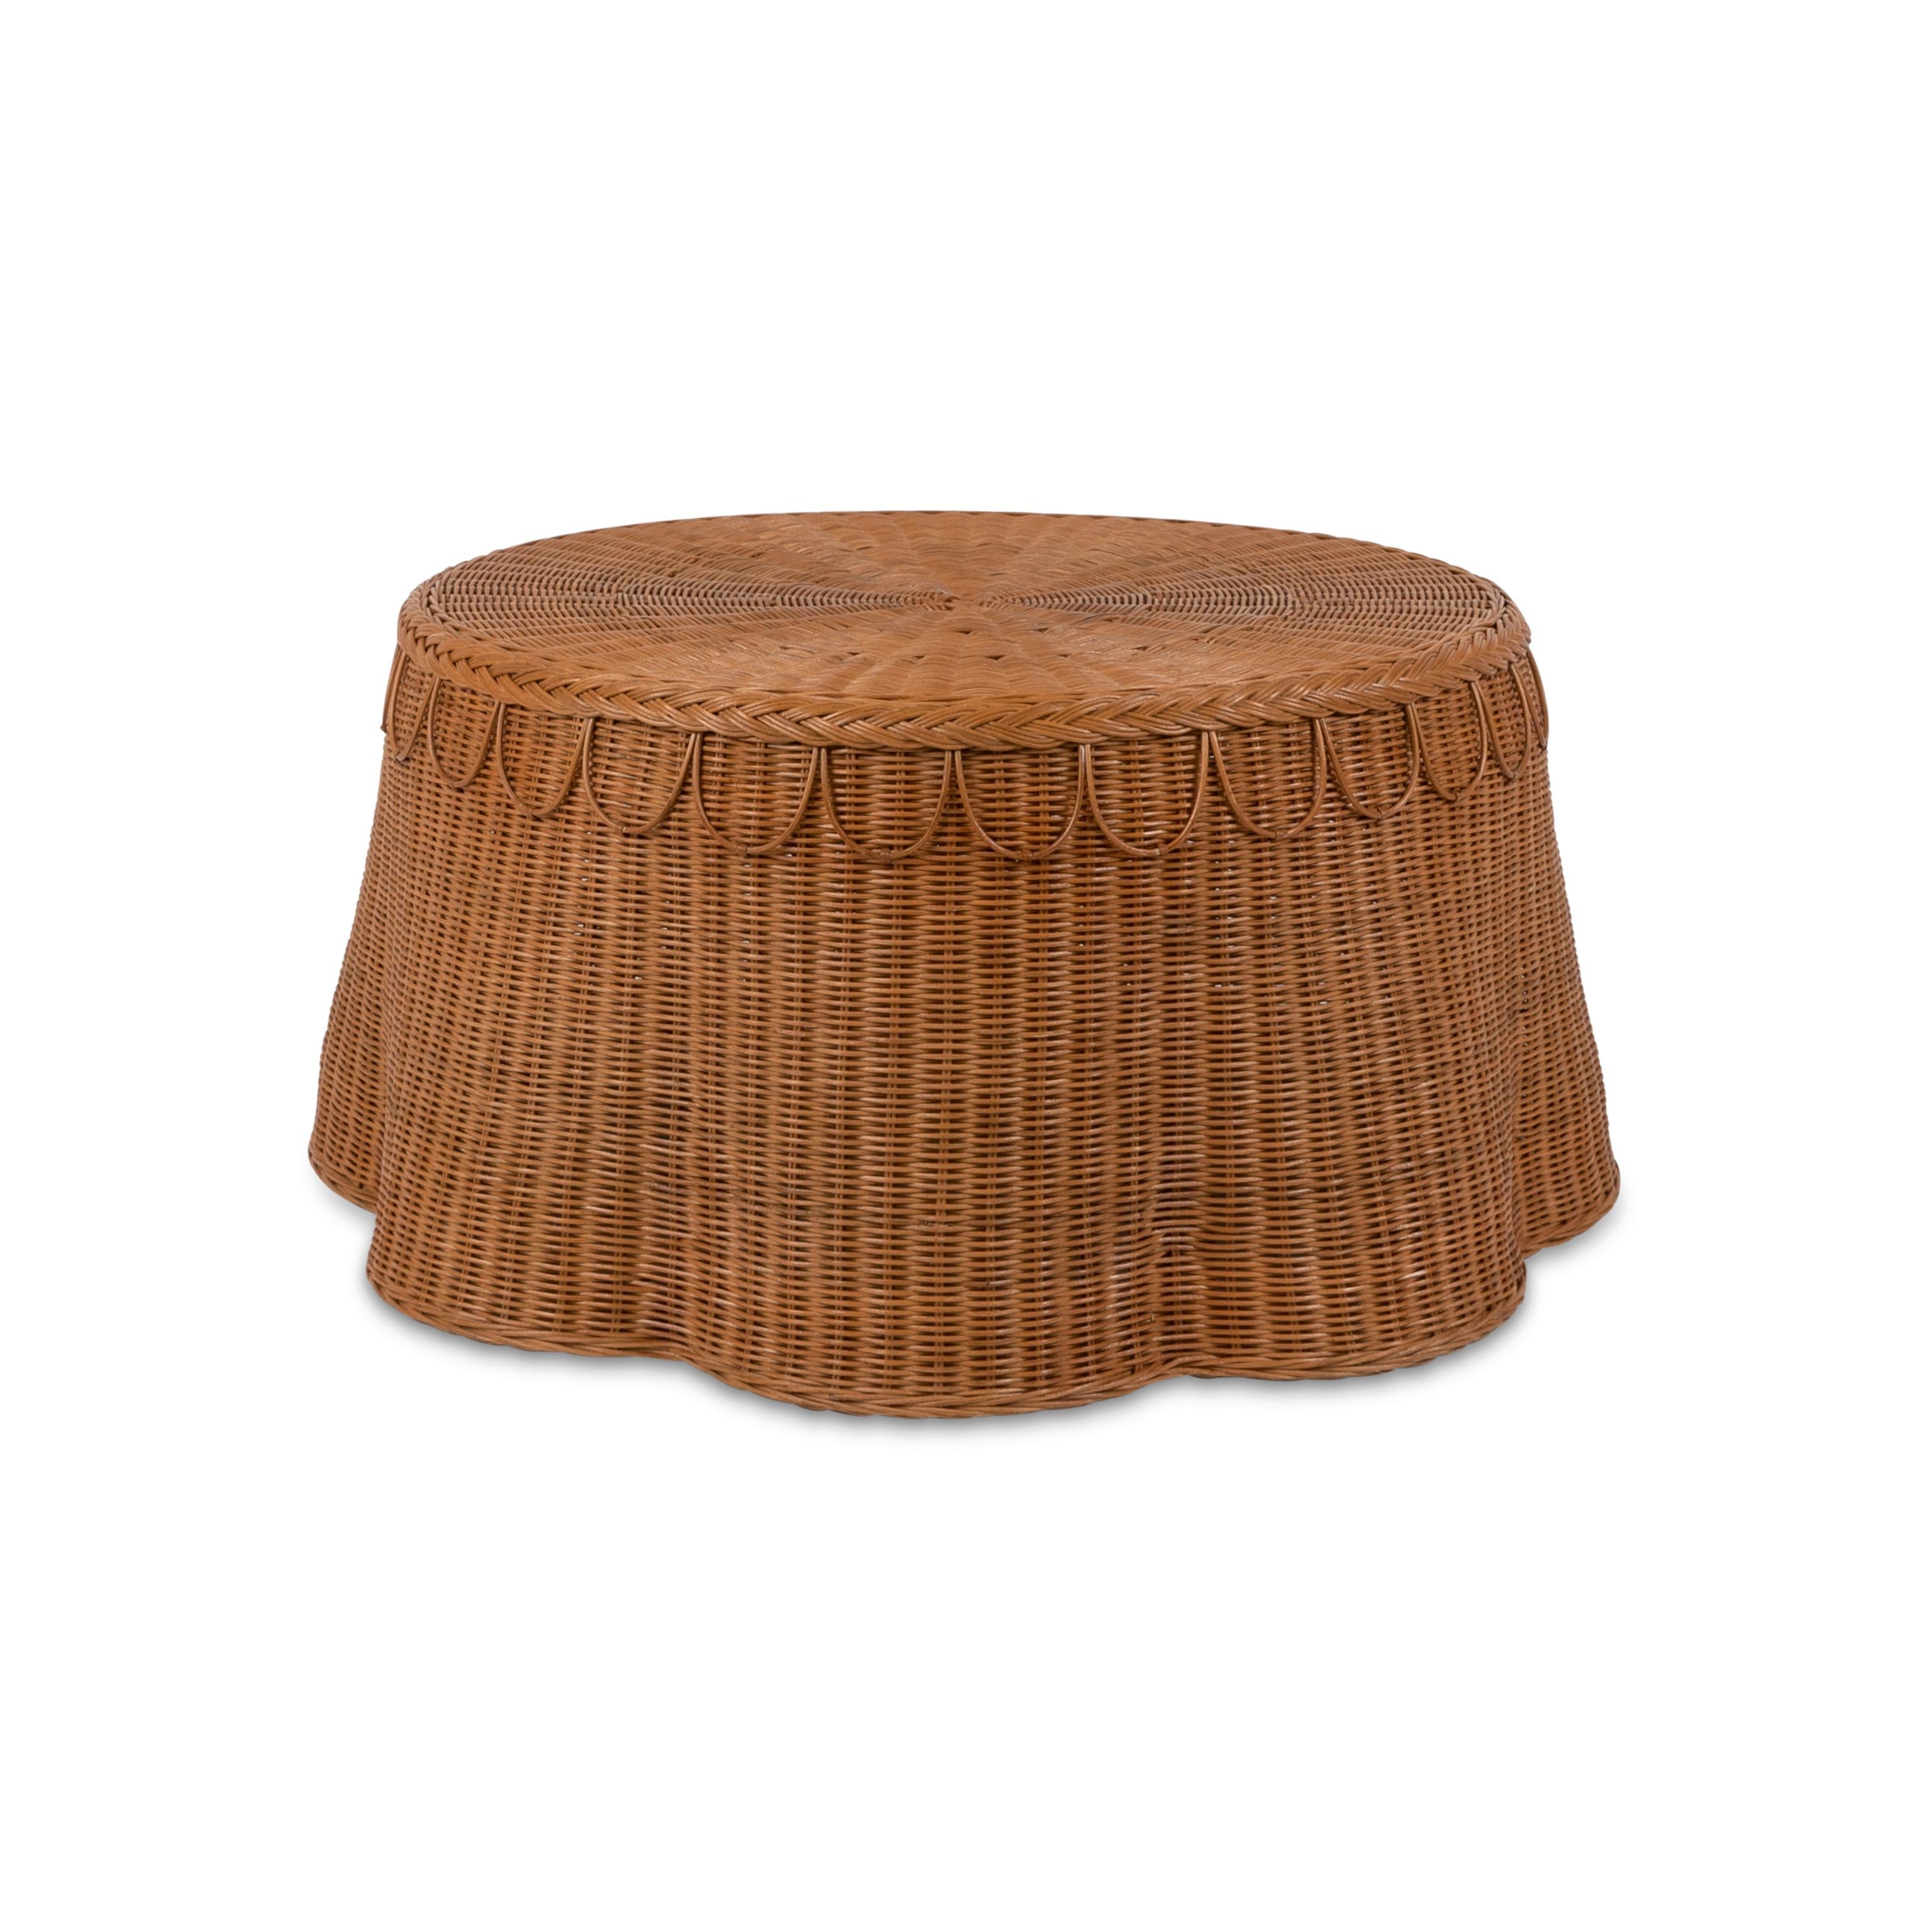 Contemporary Adeline Coffee Table in Natural Honey Rattan, Modern furniture by Louise Roe For Sale